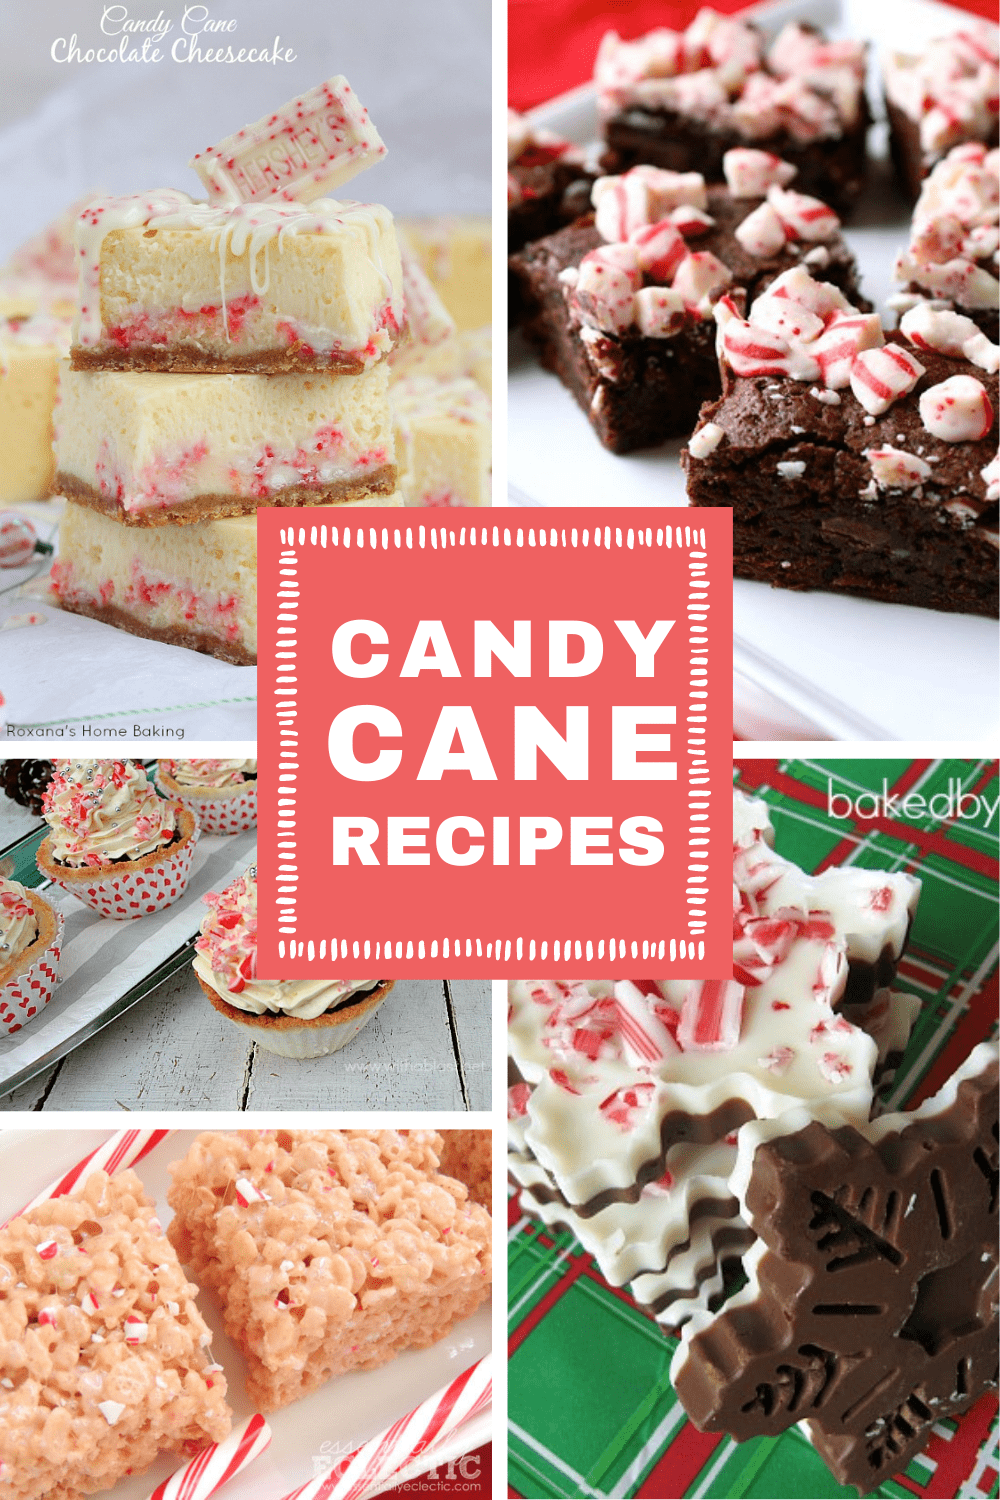 Do you always have leftover candy canes at Christmas? Well if you're wondering what to do with them we've got 16 yummy ideas for you! From cheesecake and brownies to fudge and bark there is sure to be something in here you'll find delicious! #candycanes #christmas #recipes #treats
